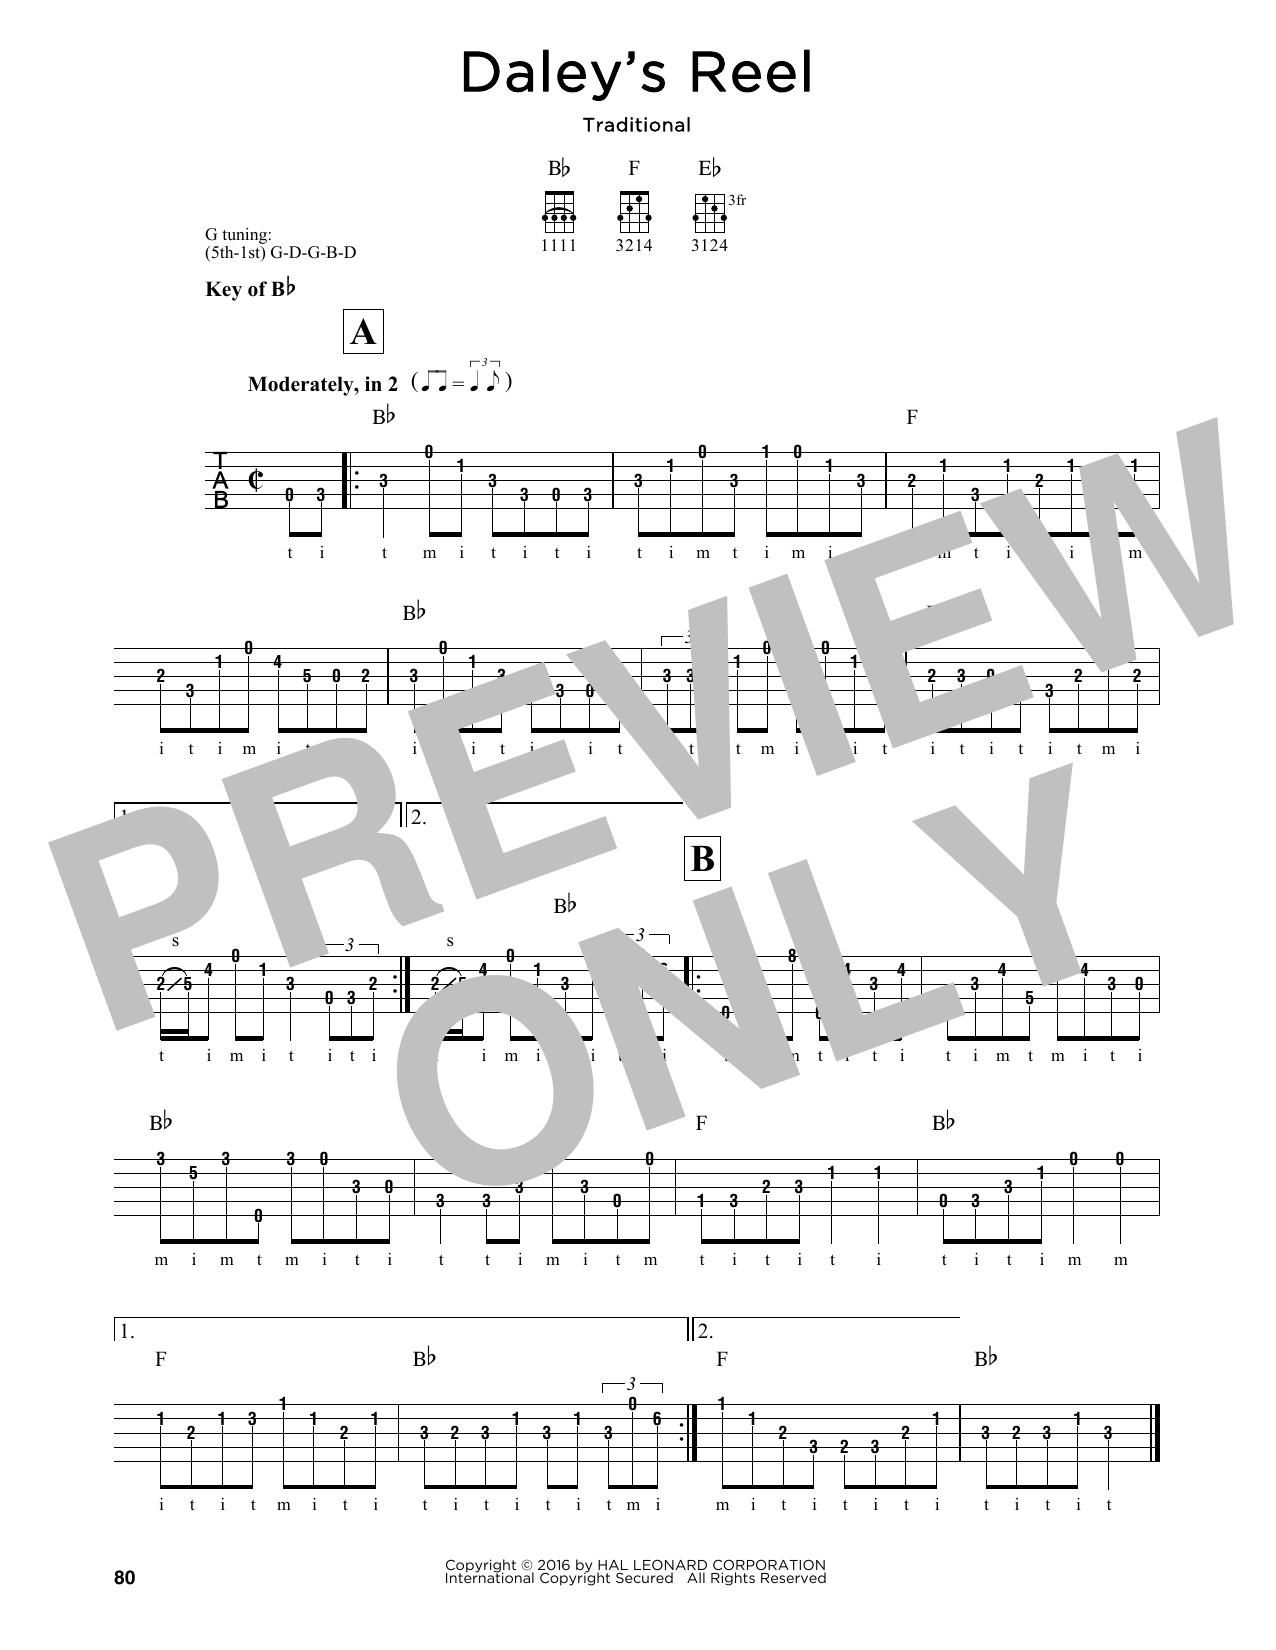 Download Traditional Daley's Reel Sheet Music